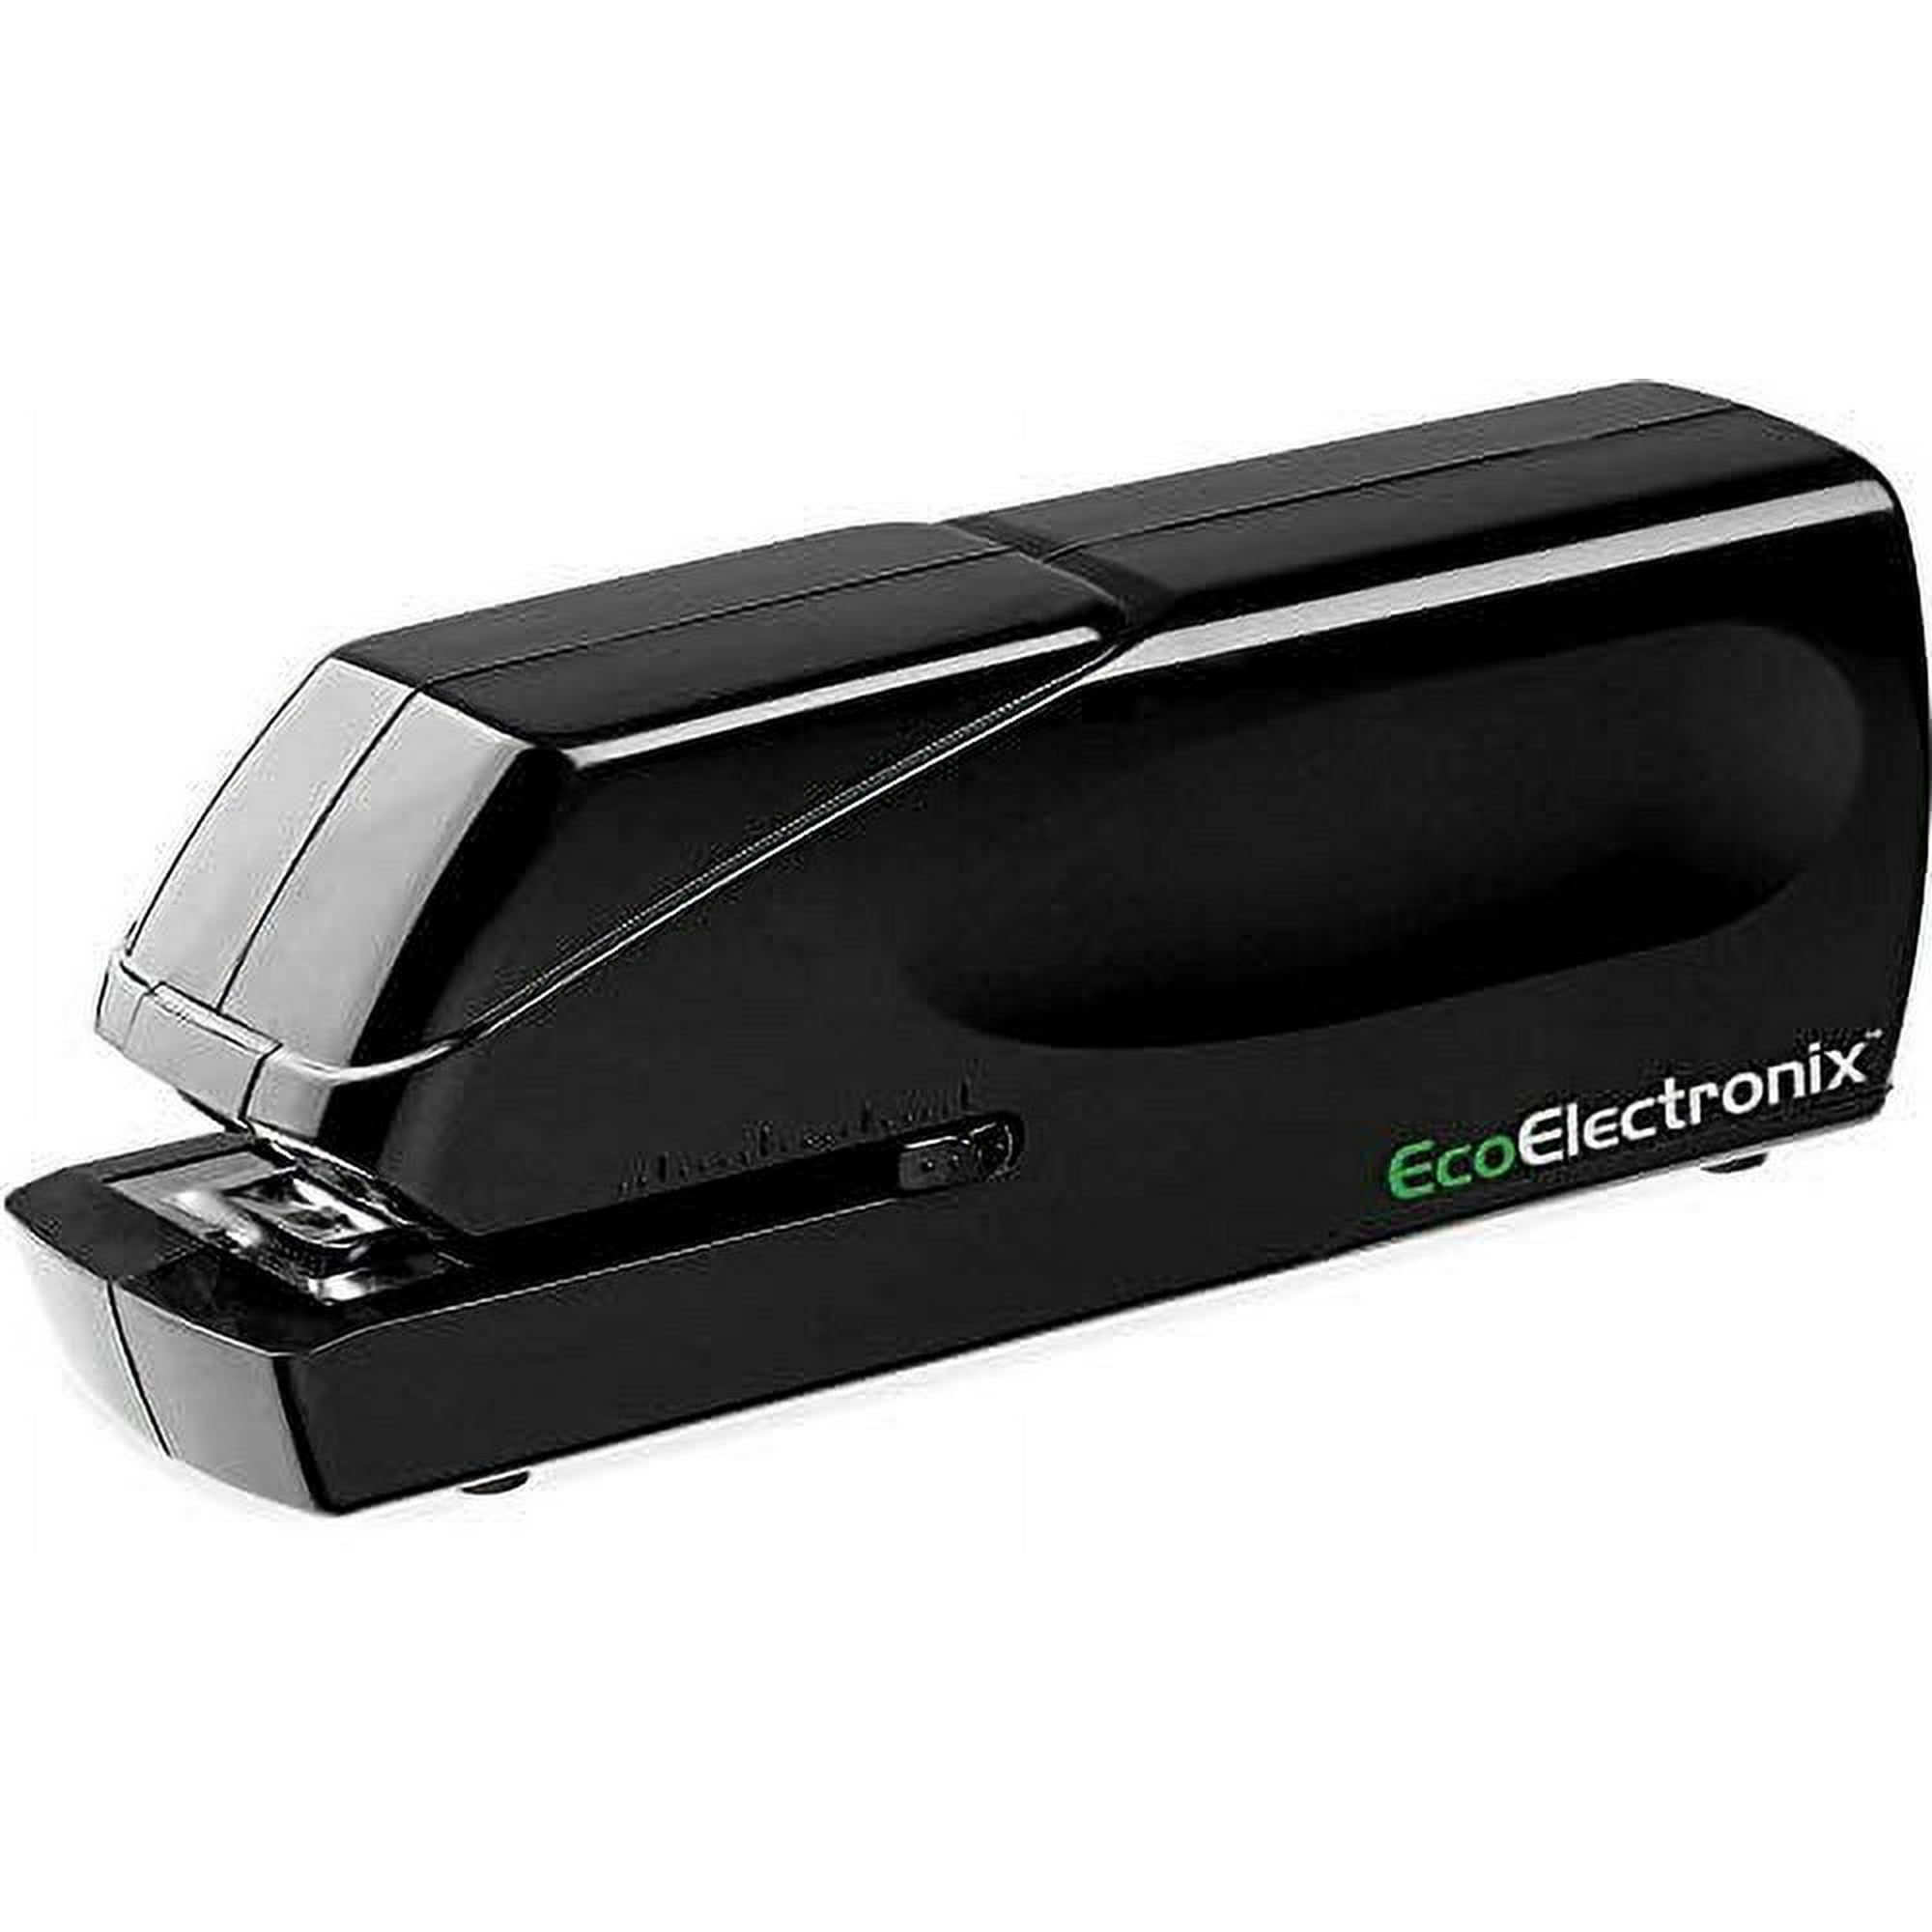 EcoElectronix EX-25 Automatic Electric Stapler - Battery Powered, 30 Sheet  Capacity Heavy Duty Stapler, Quiet Operation & Jam-Free Staplers for